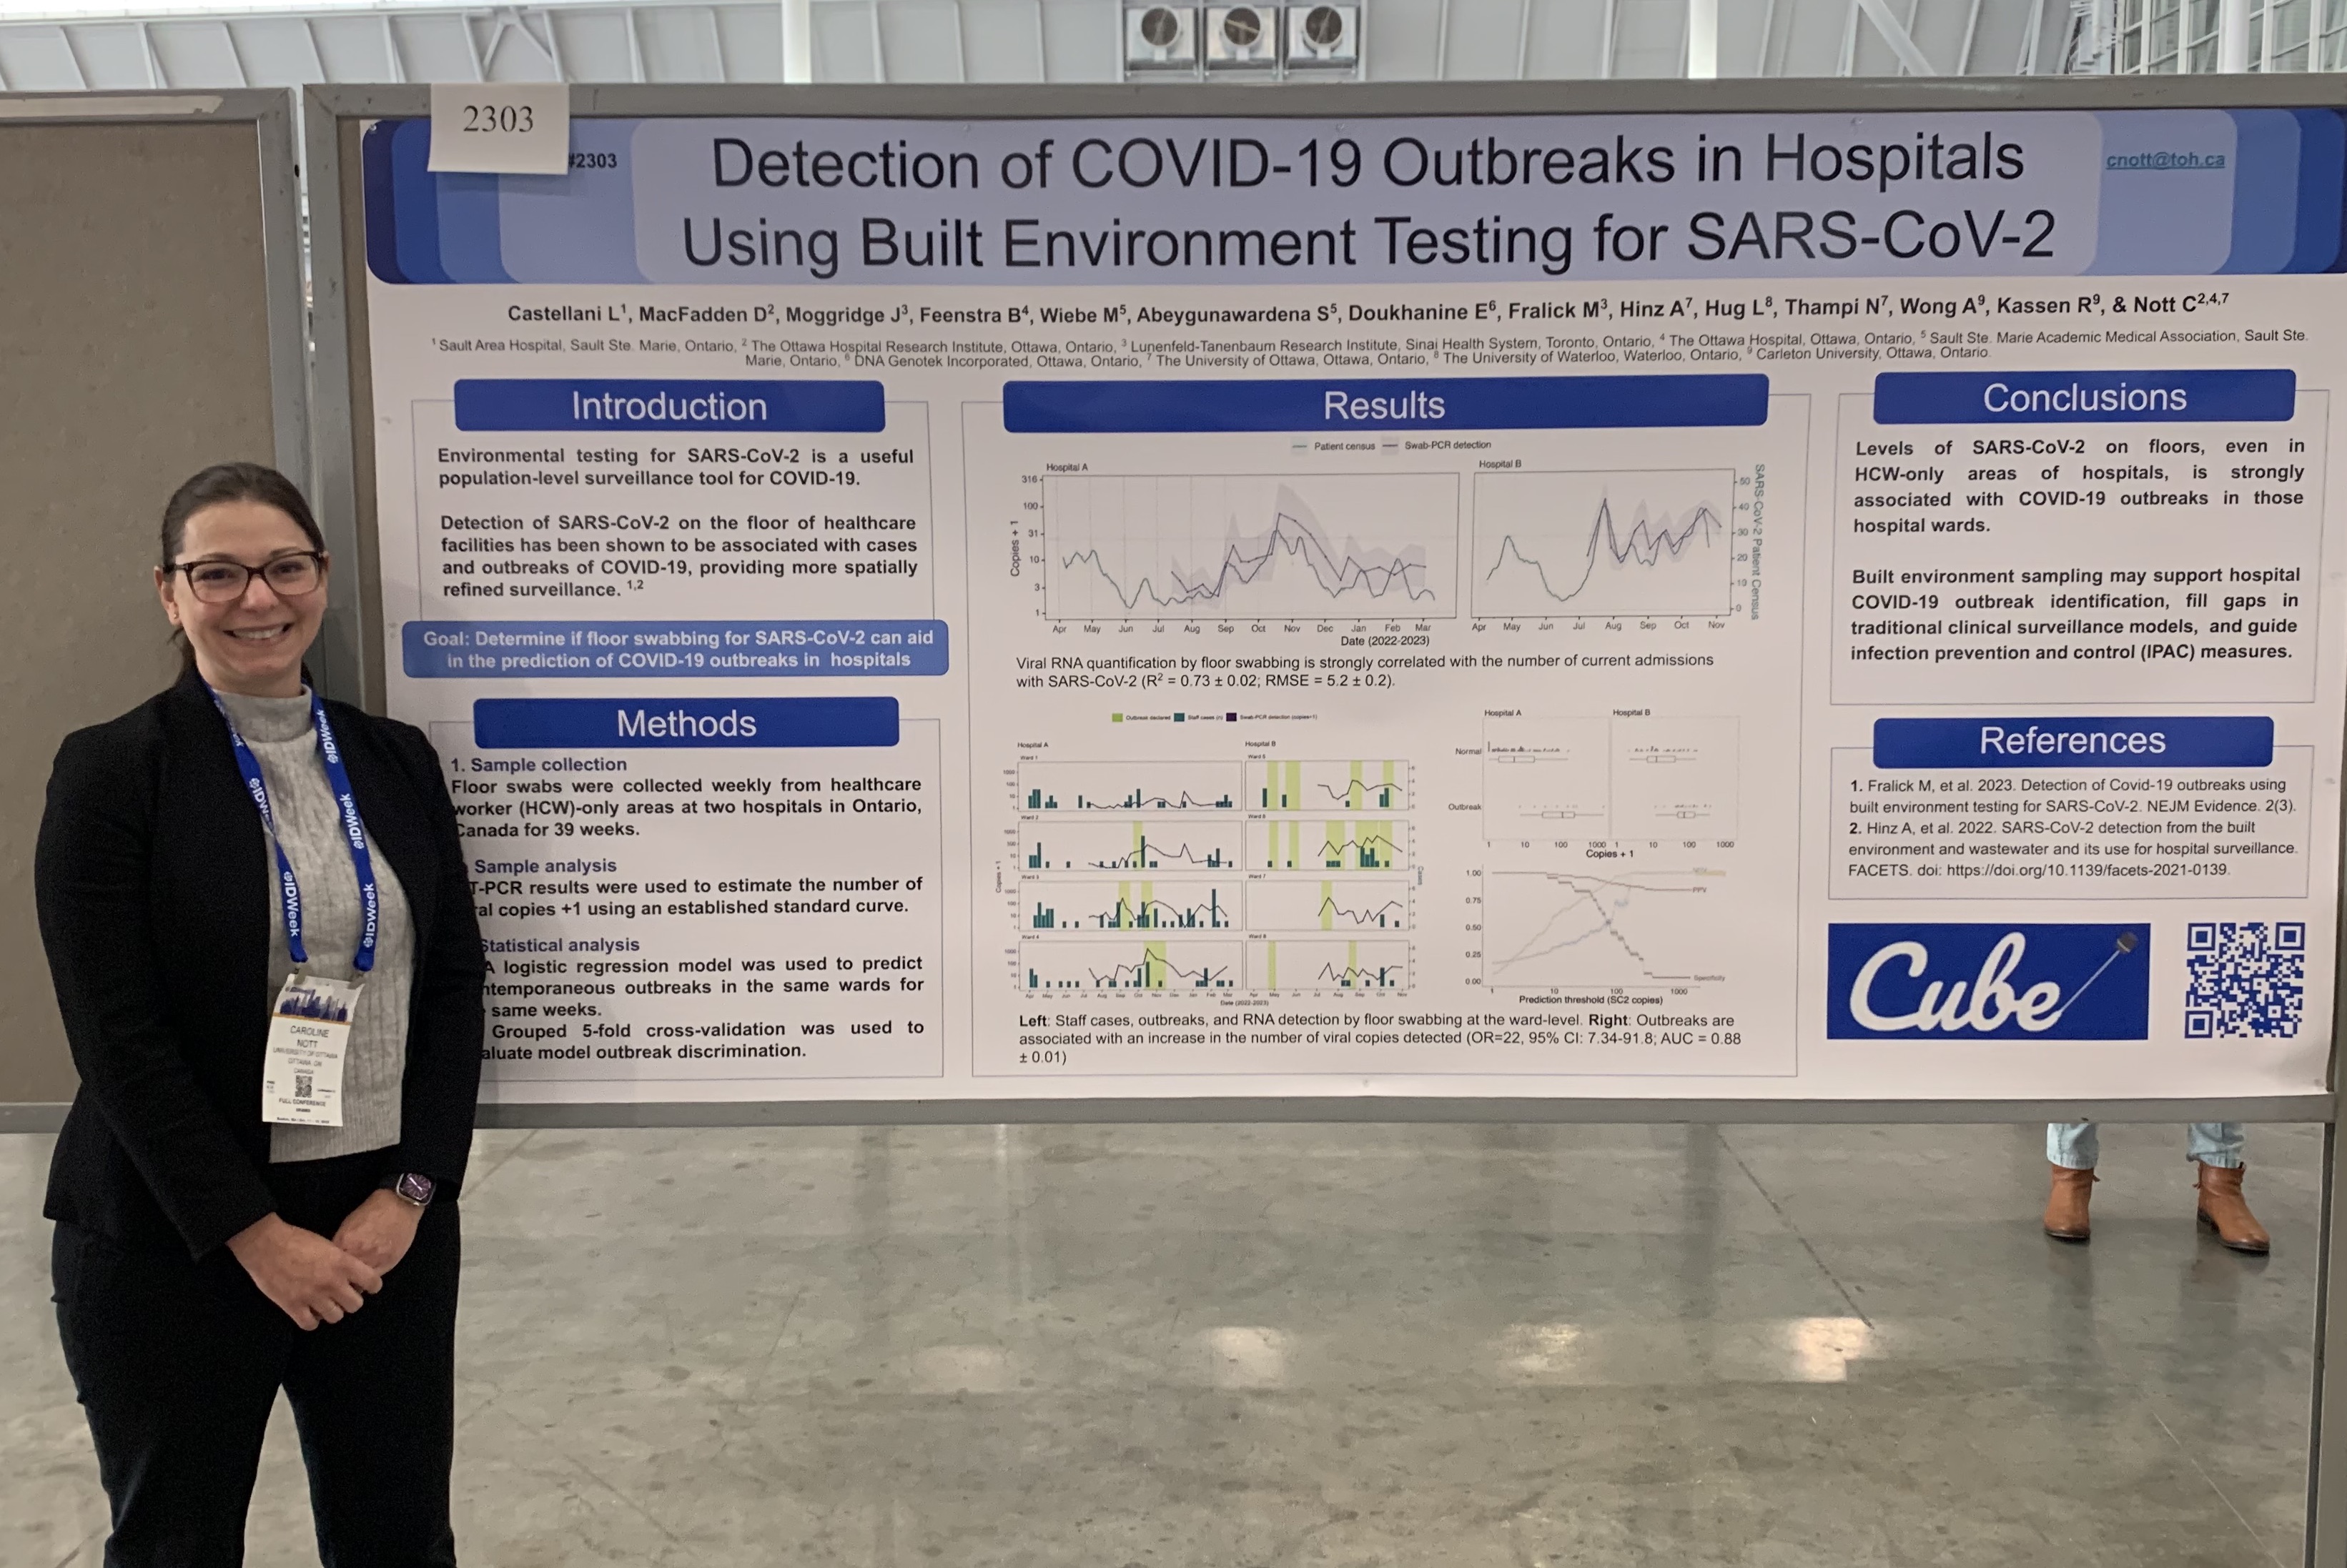 Dr. Caroline Nott with her poster “Detection of COVID-19 Outbreaks in Hospitals Using Built Environment Testing for SARS-CoV-2” at IDWeek